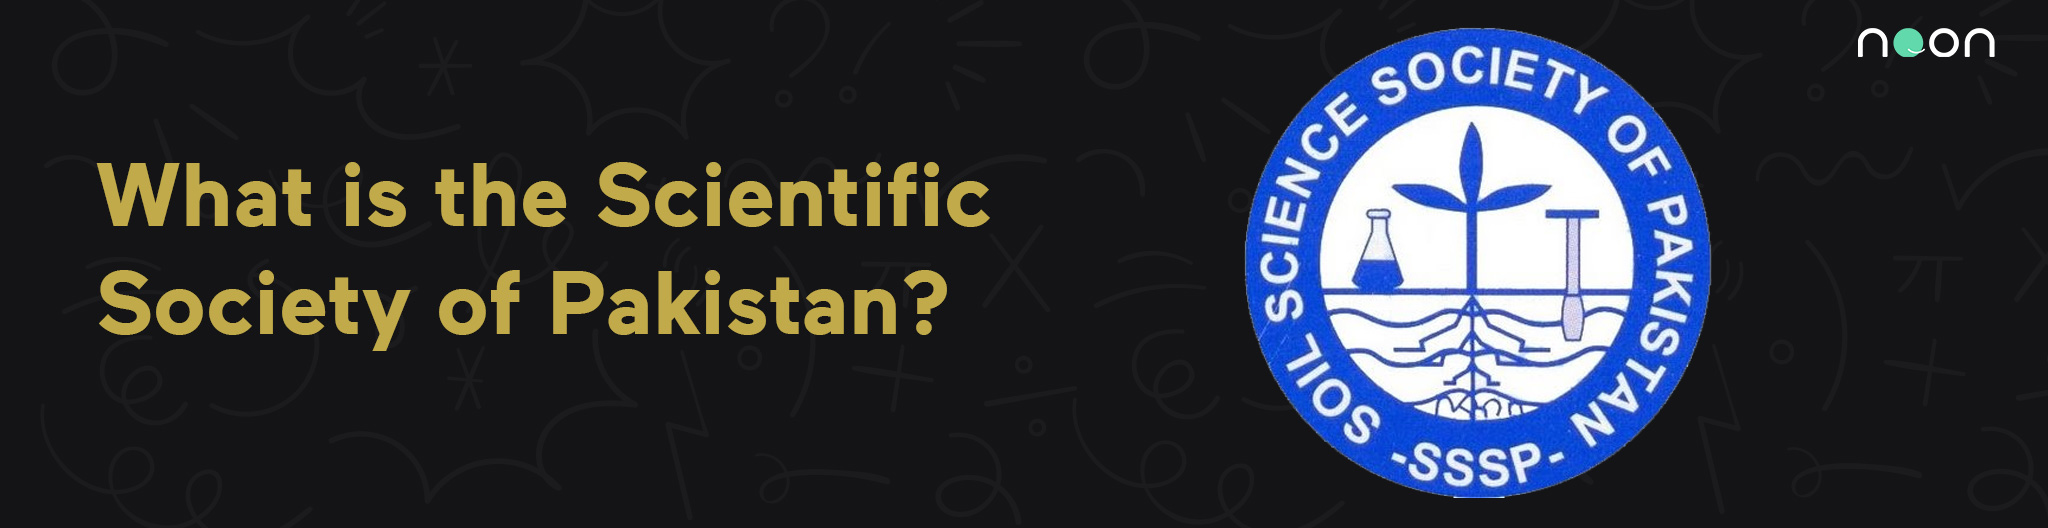 What is the Scientific Society of Pakistan